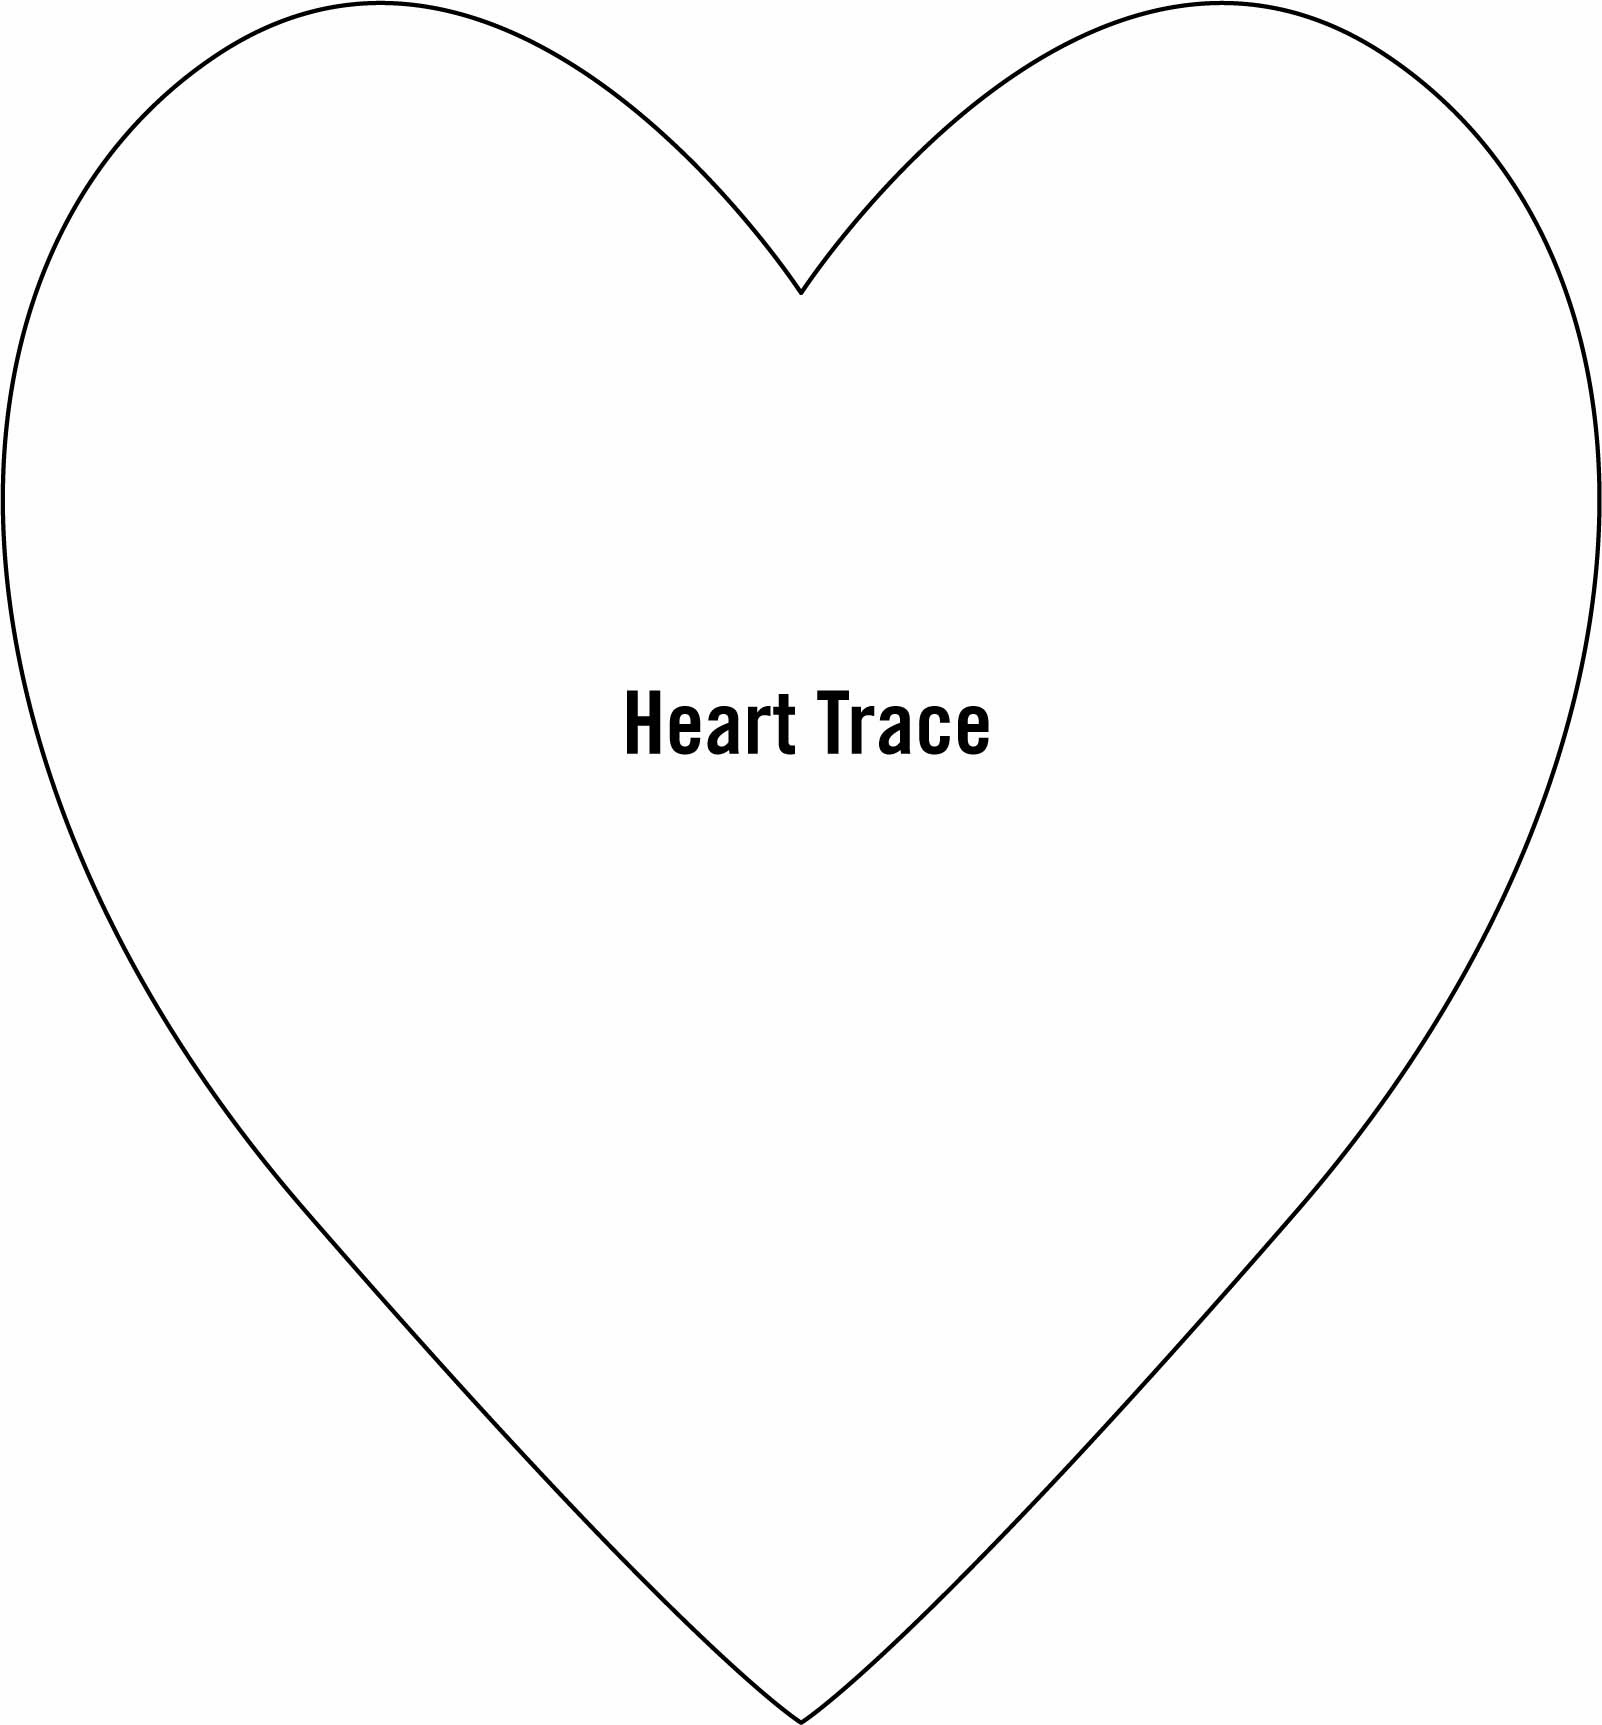 i found a quilted heart template